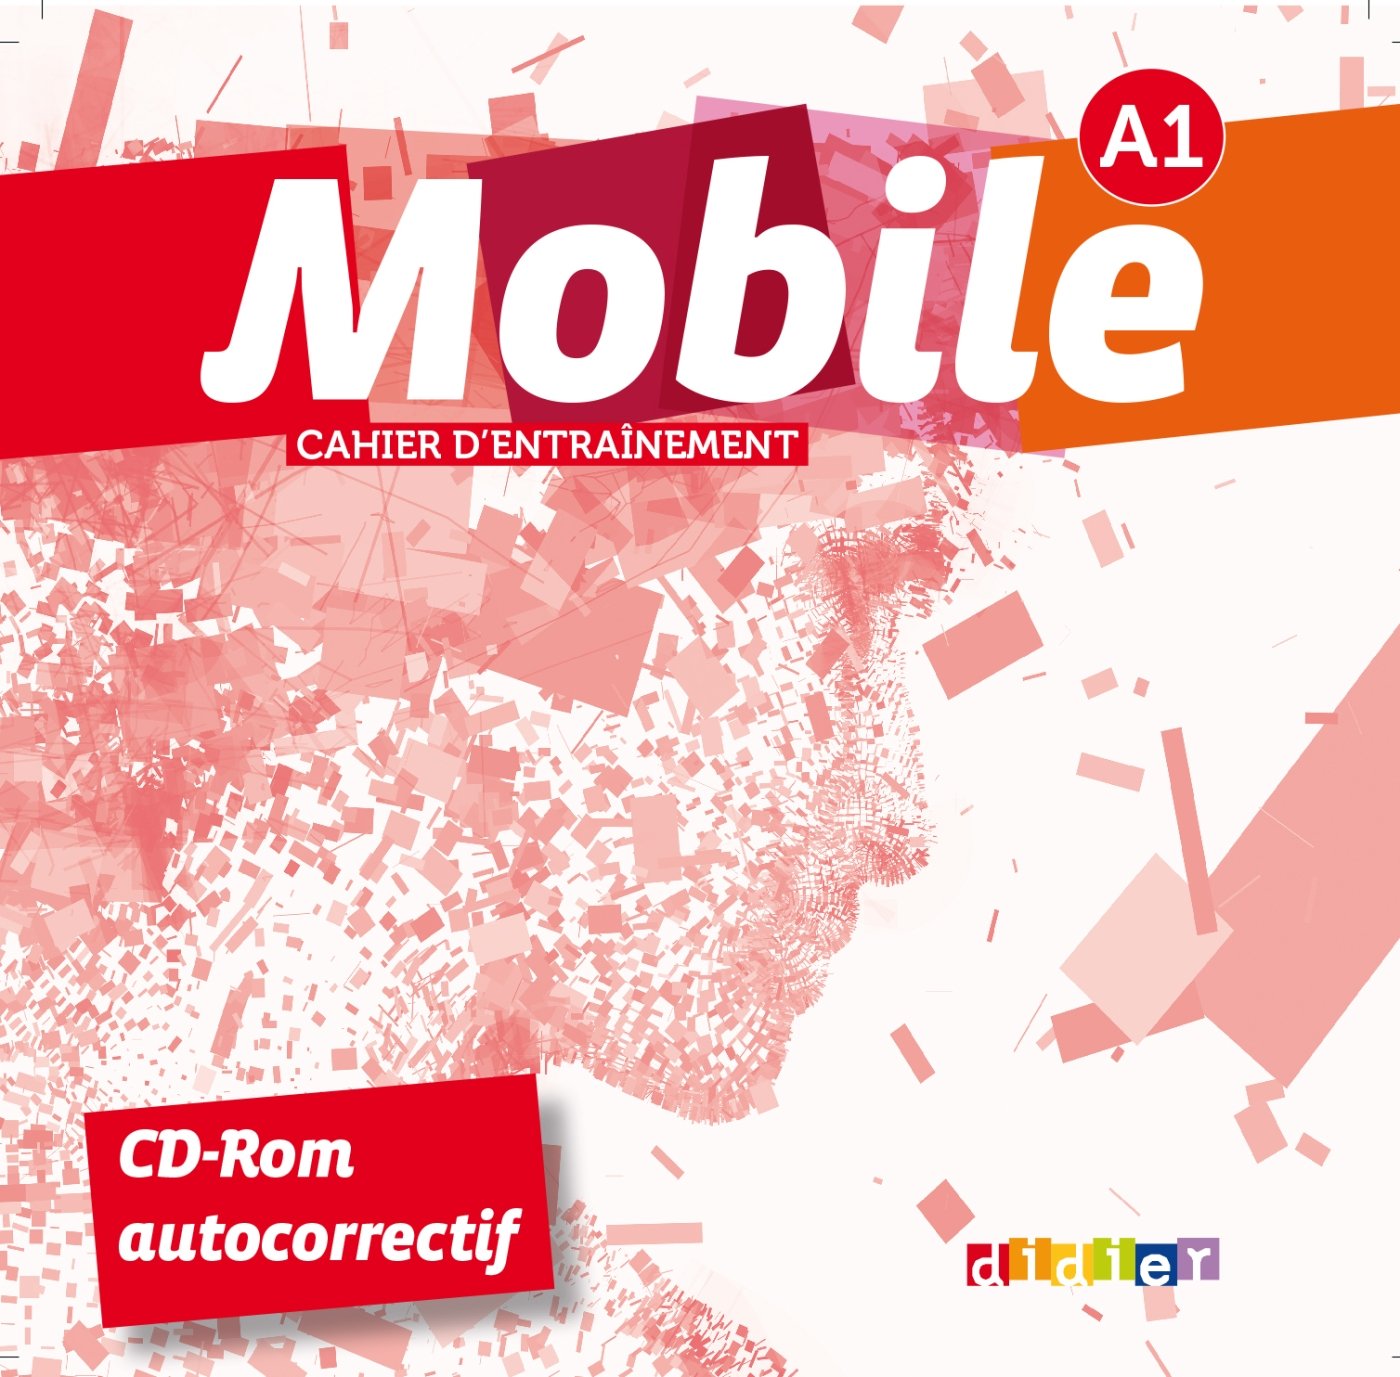 MOBILE 1 Cahier d'entrainement CD-ROM